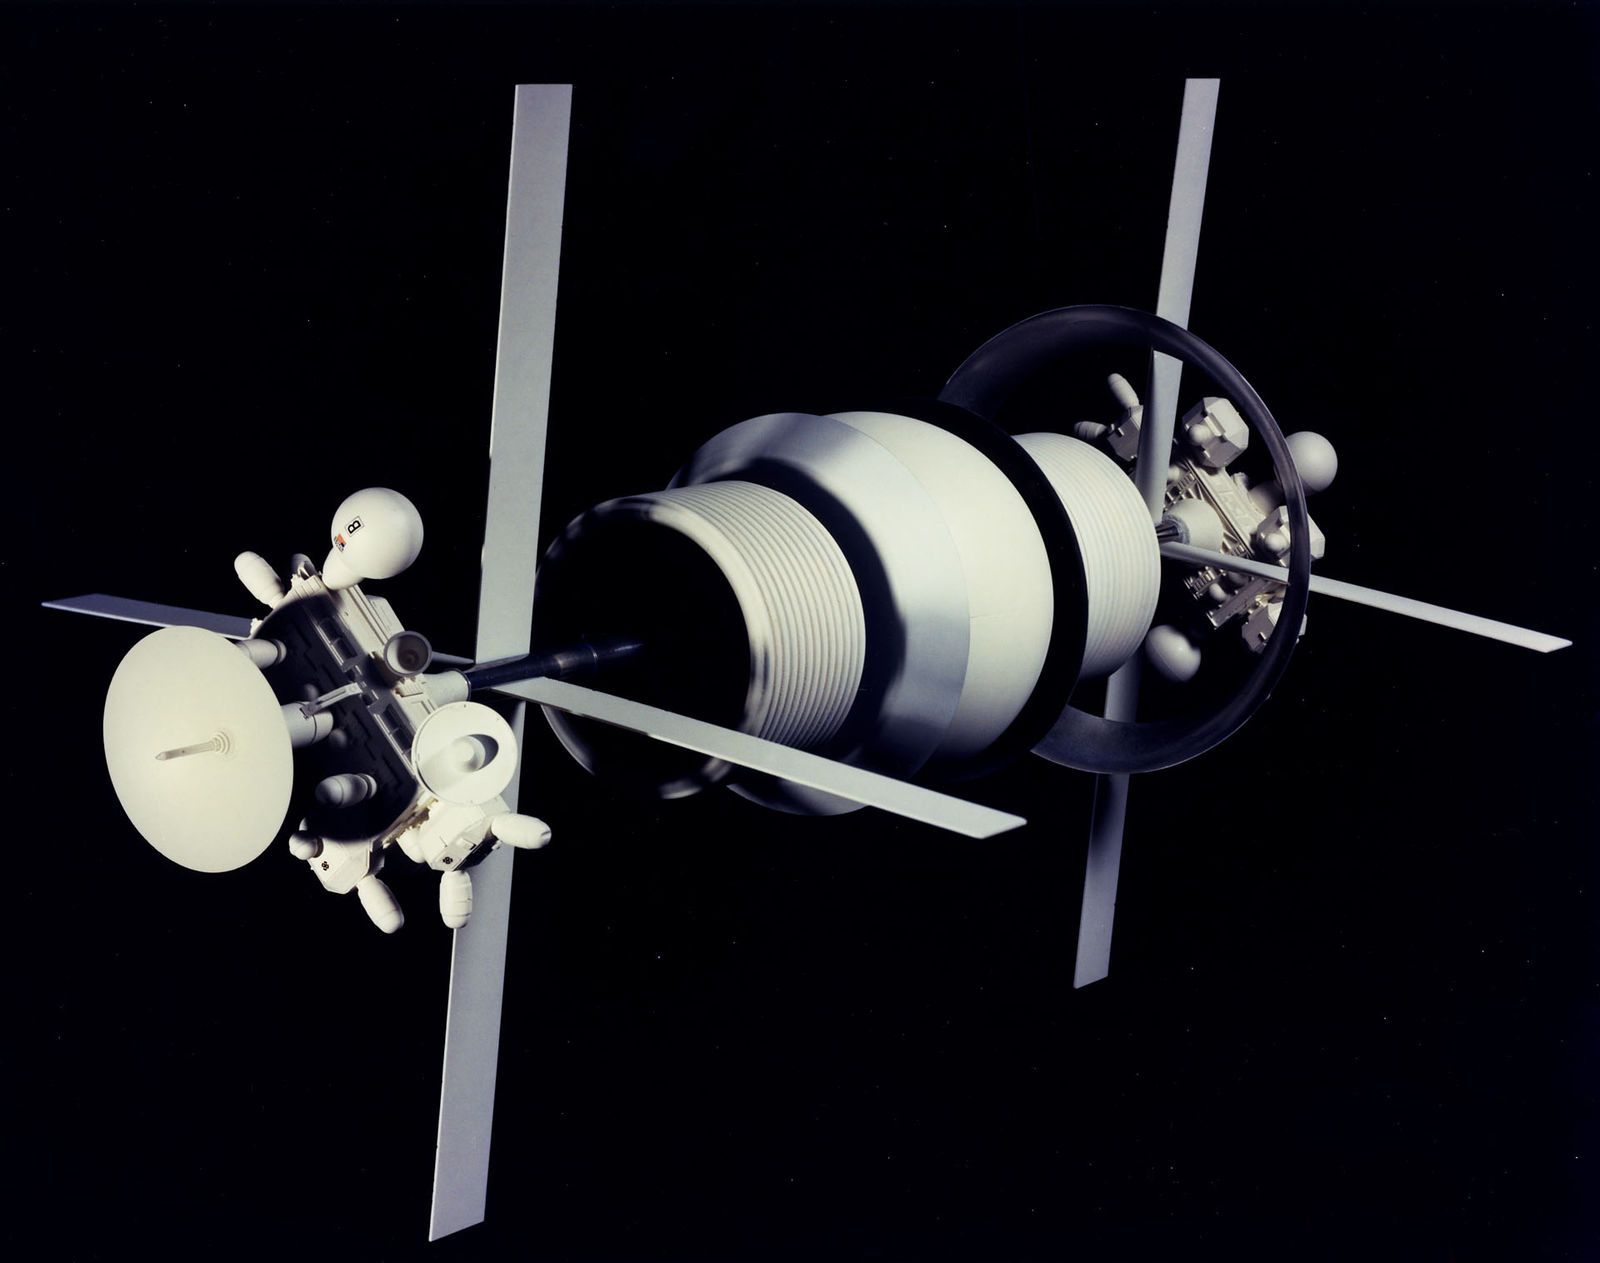 Space station concept images image 11